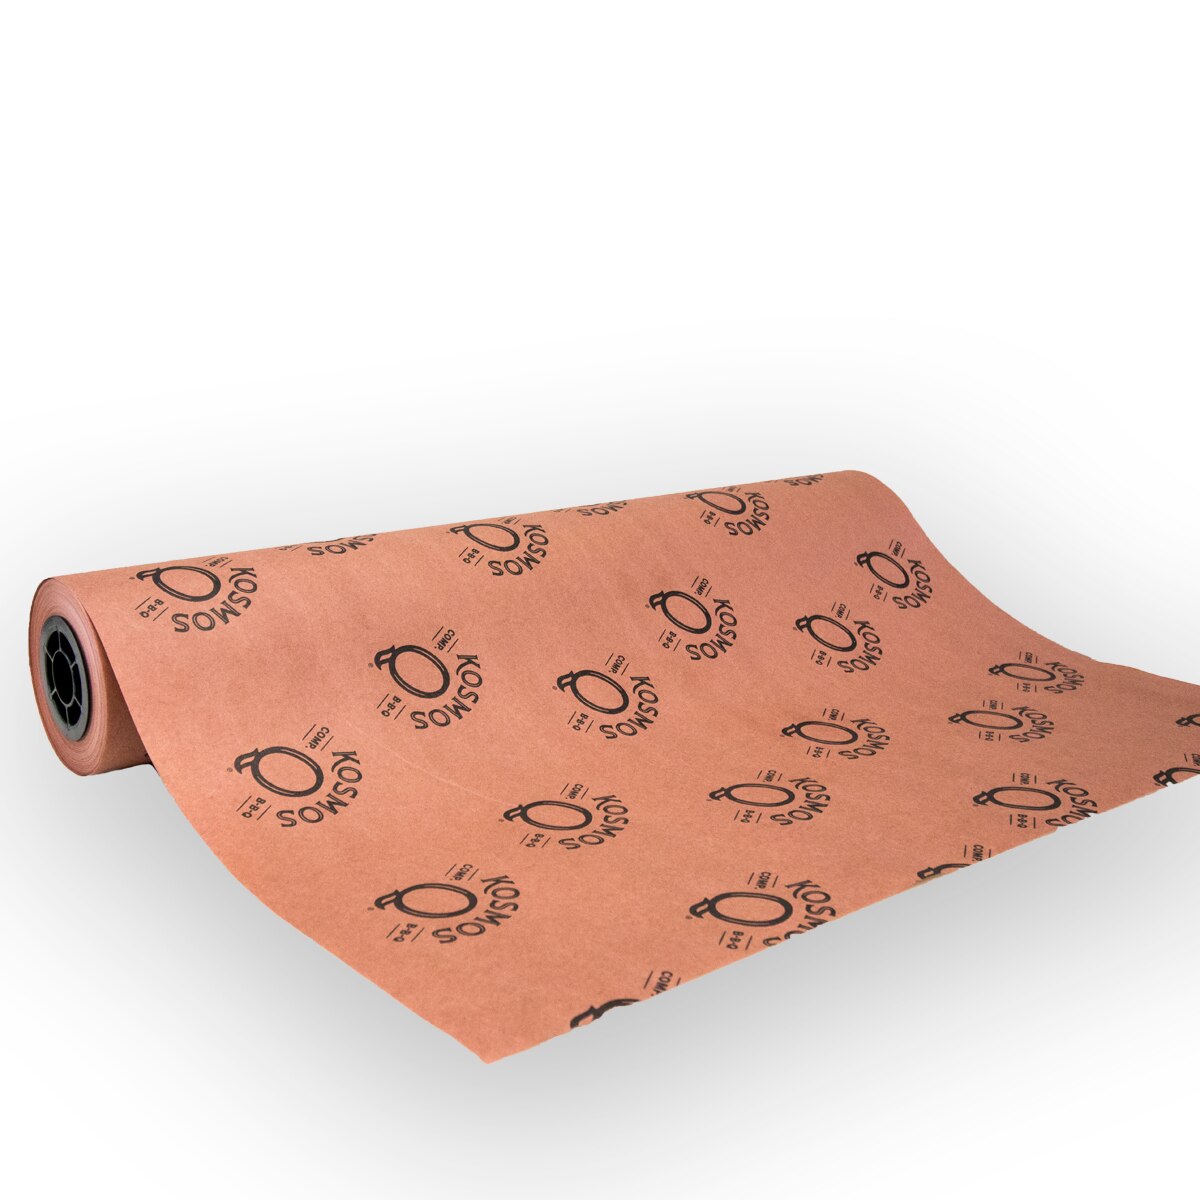 Kosmo's Q BBQ Accessories Pink/Peach Butcher Paper "24" x 200'  | FDA Approved, Made in USA